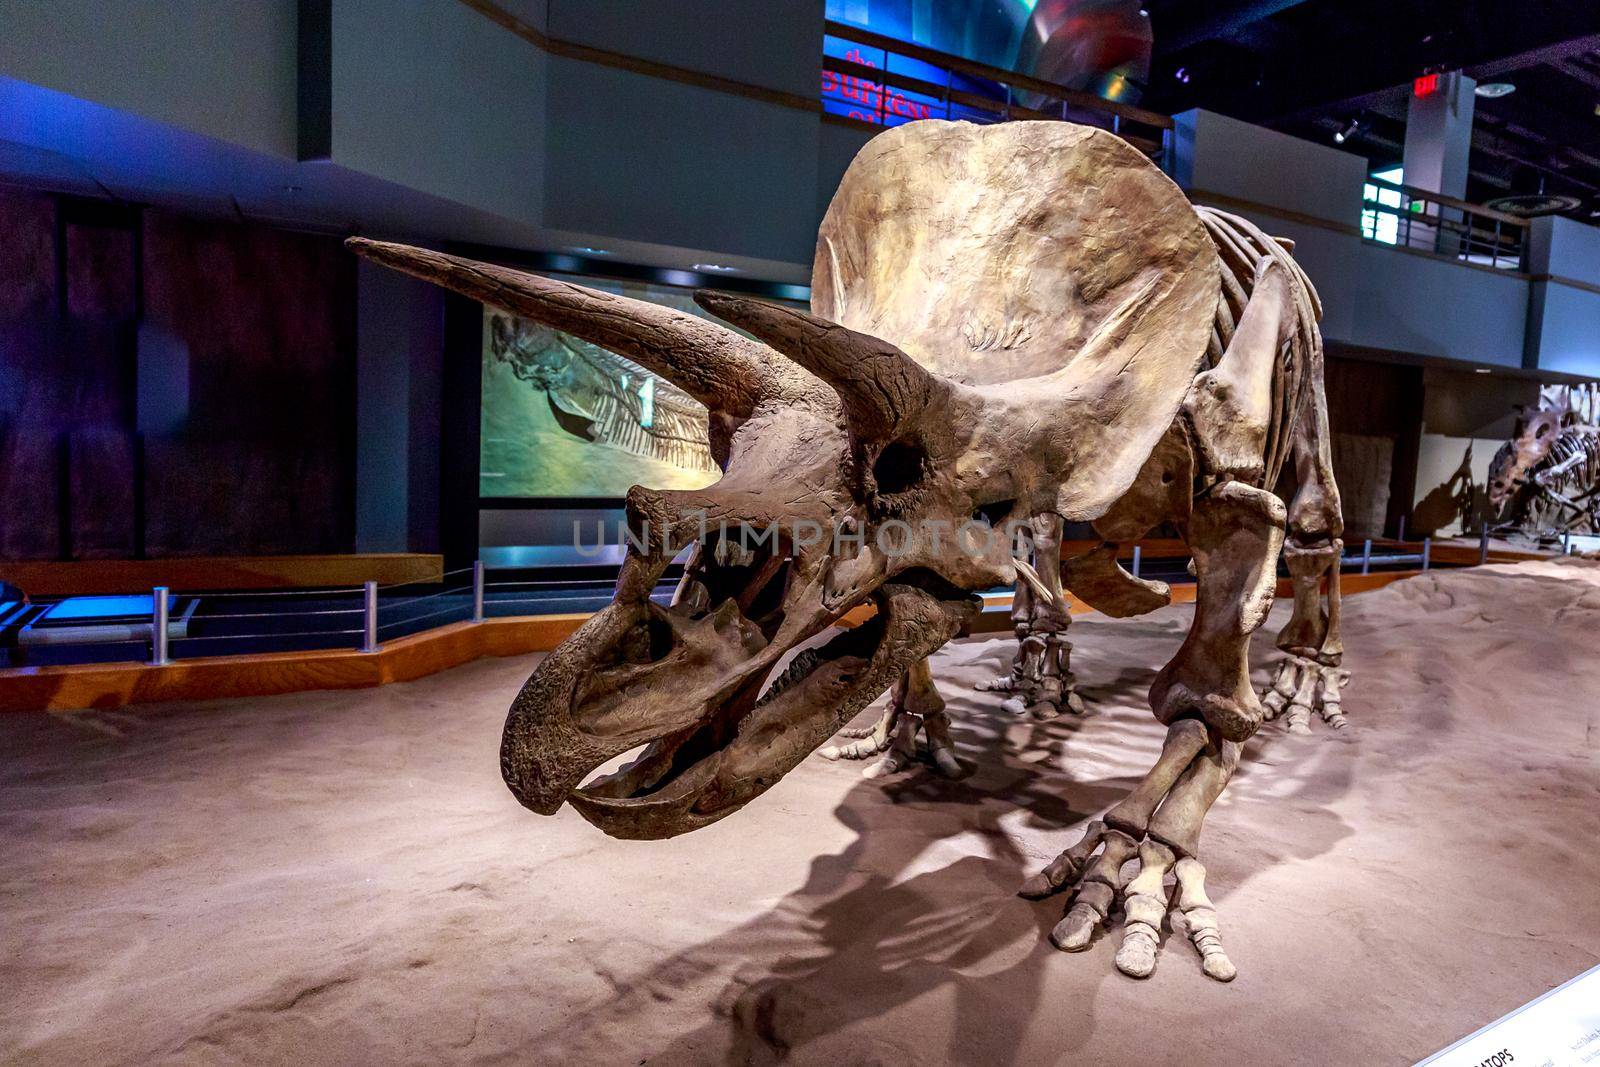 Drumheller, AB Canada - AUGUST 14, 2014: Triceratops fossil is on exhibition in Royal Tyrrell Museum of Palaeontology.